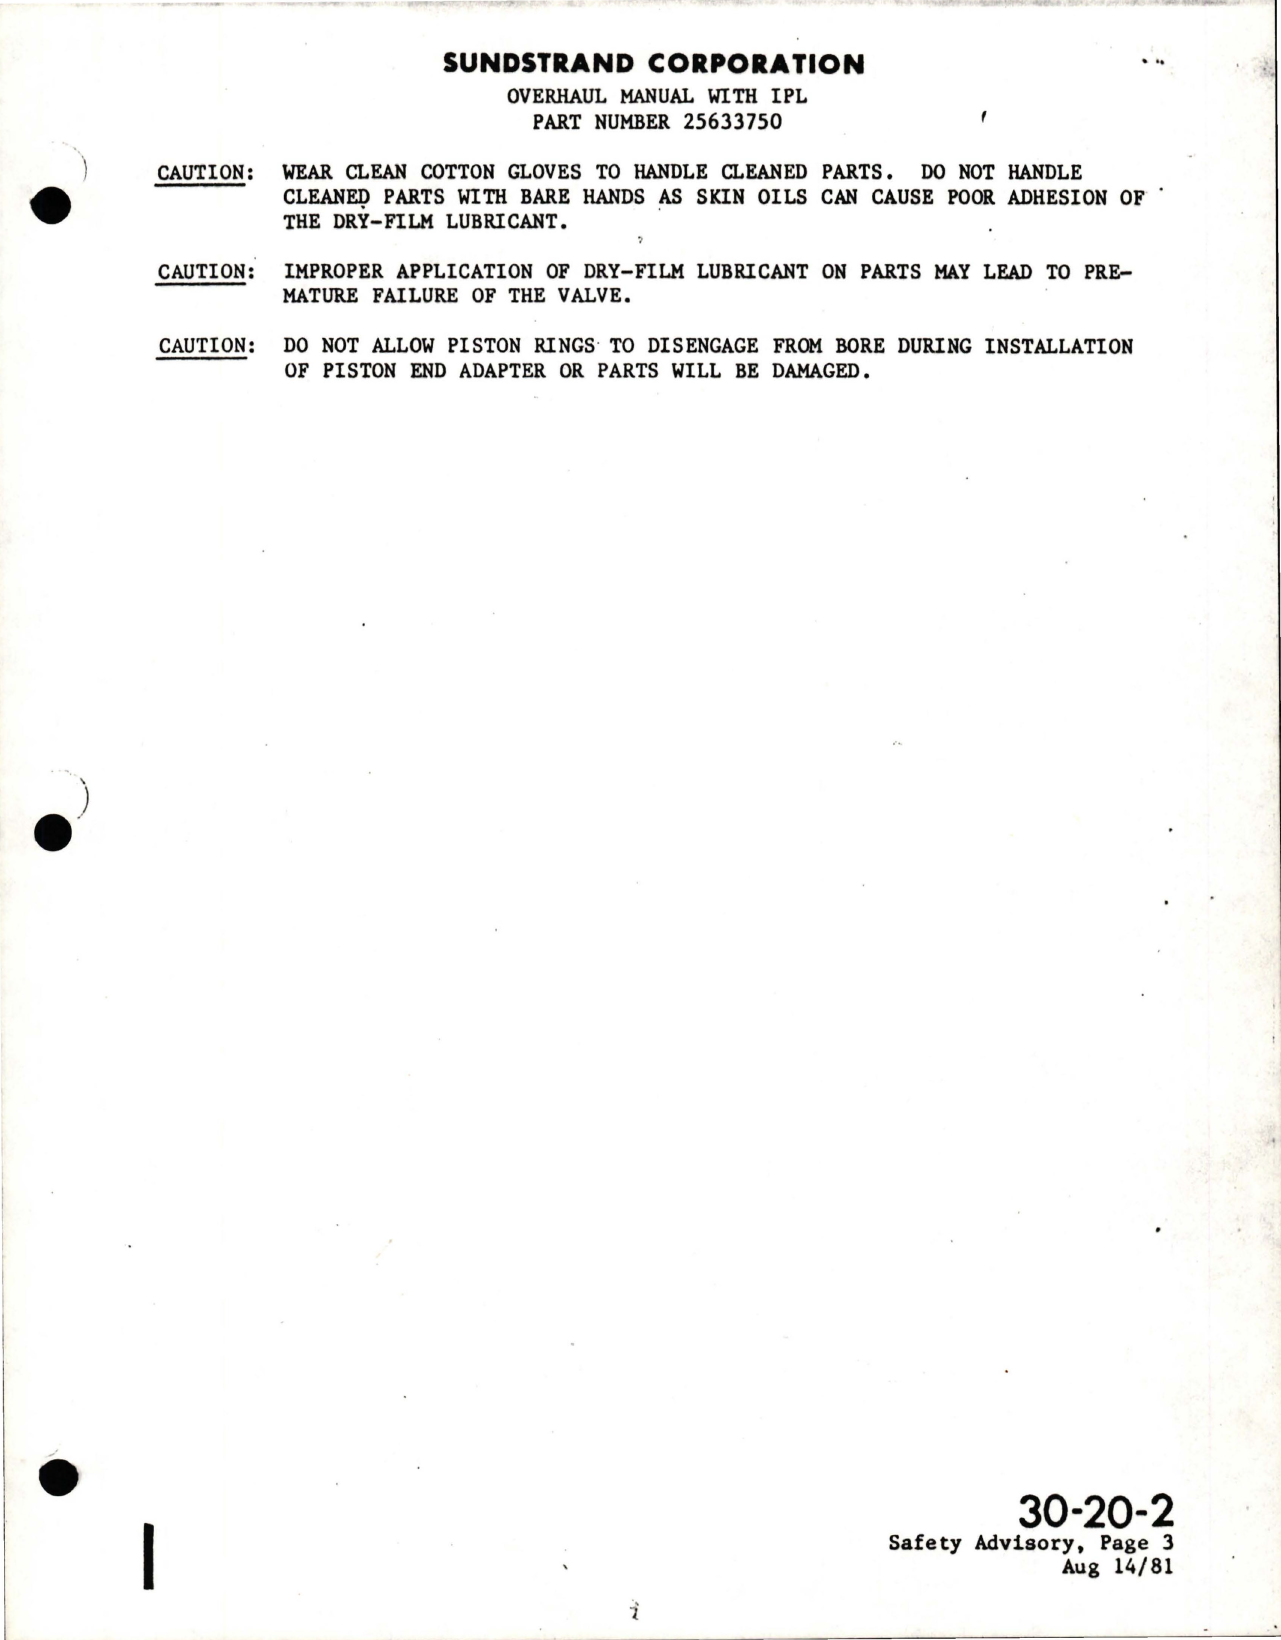 Sample page 7 from AirCorps Library document: Overhaul Manual for Air Valve